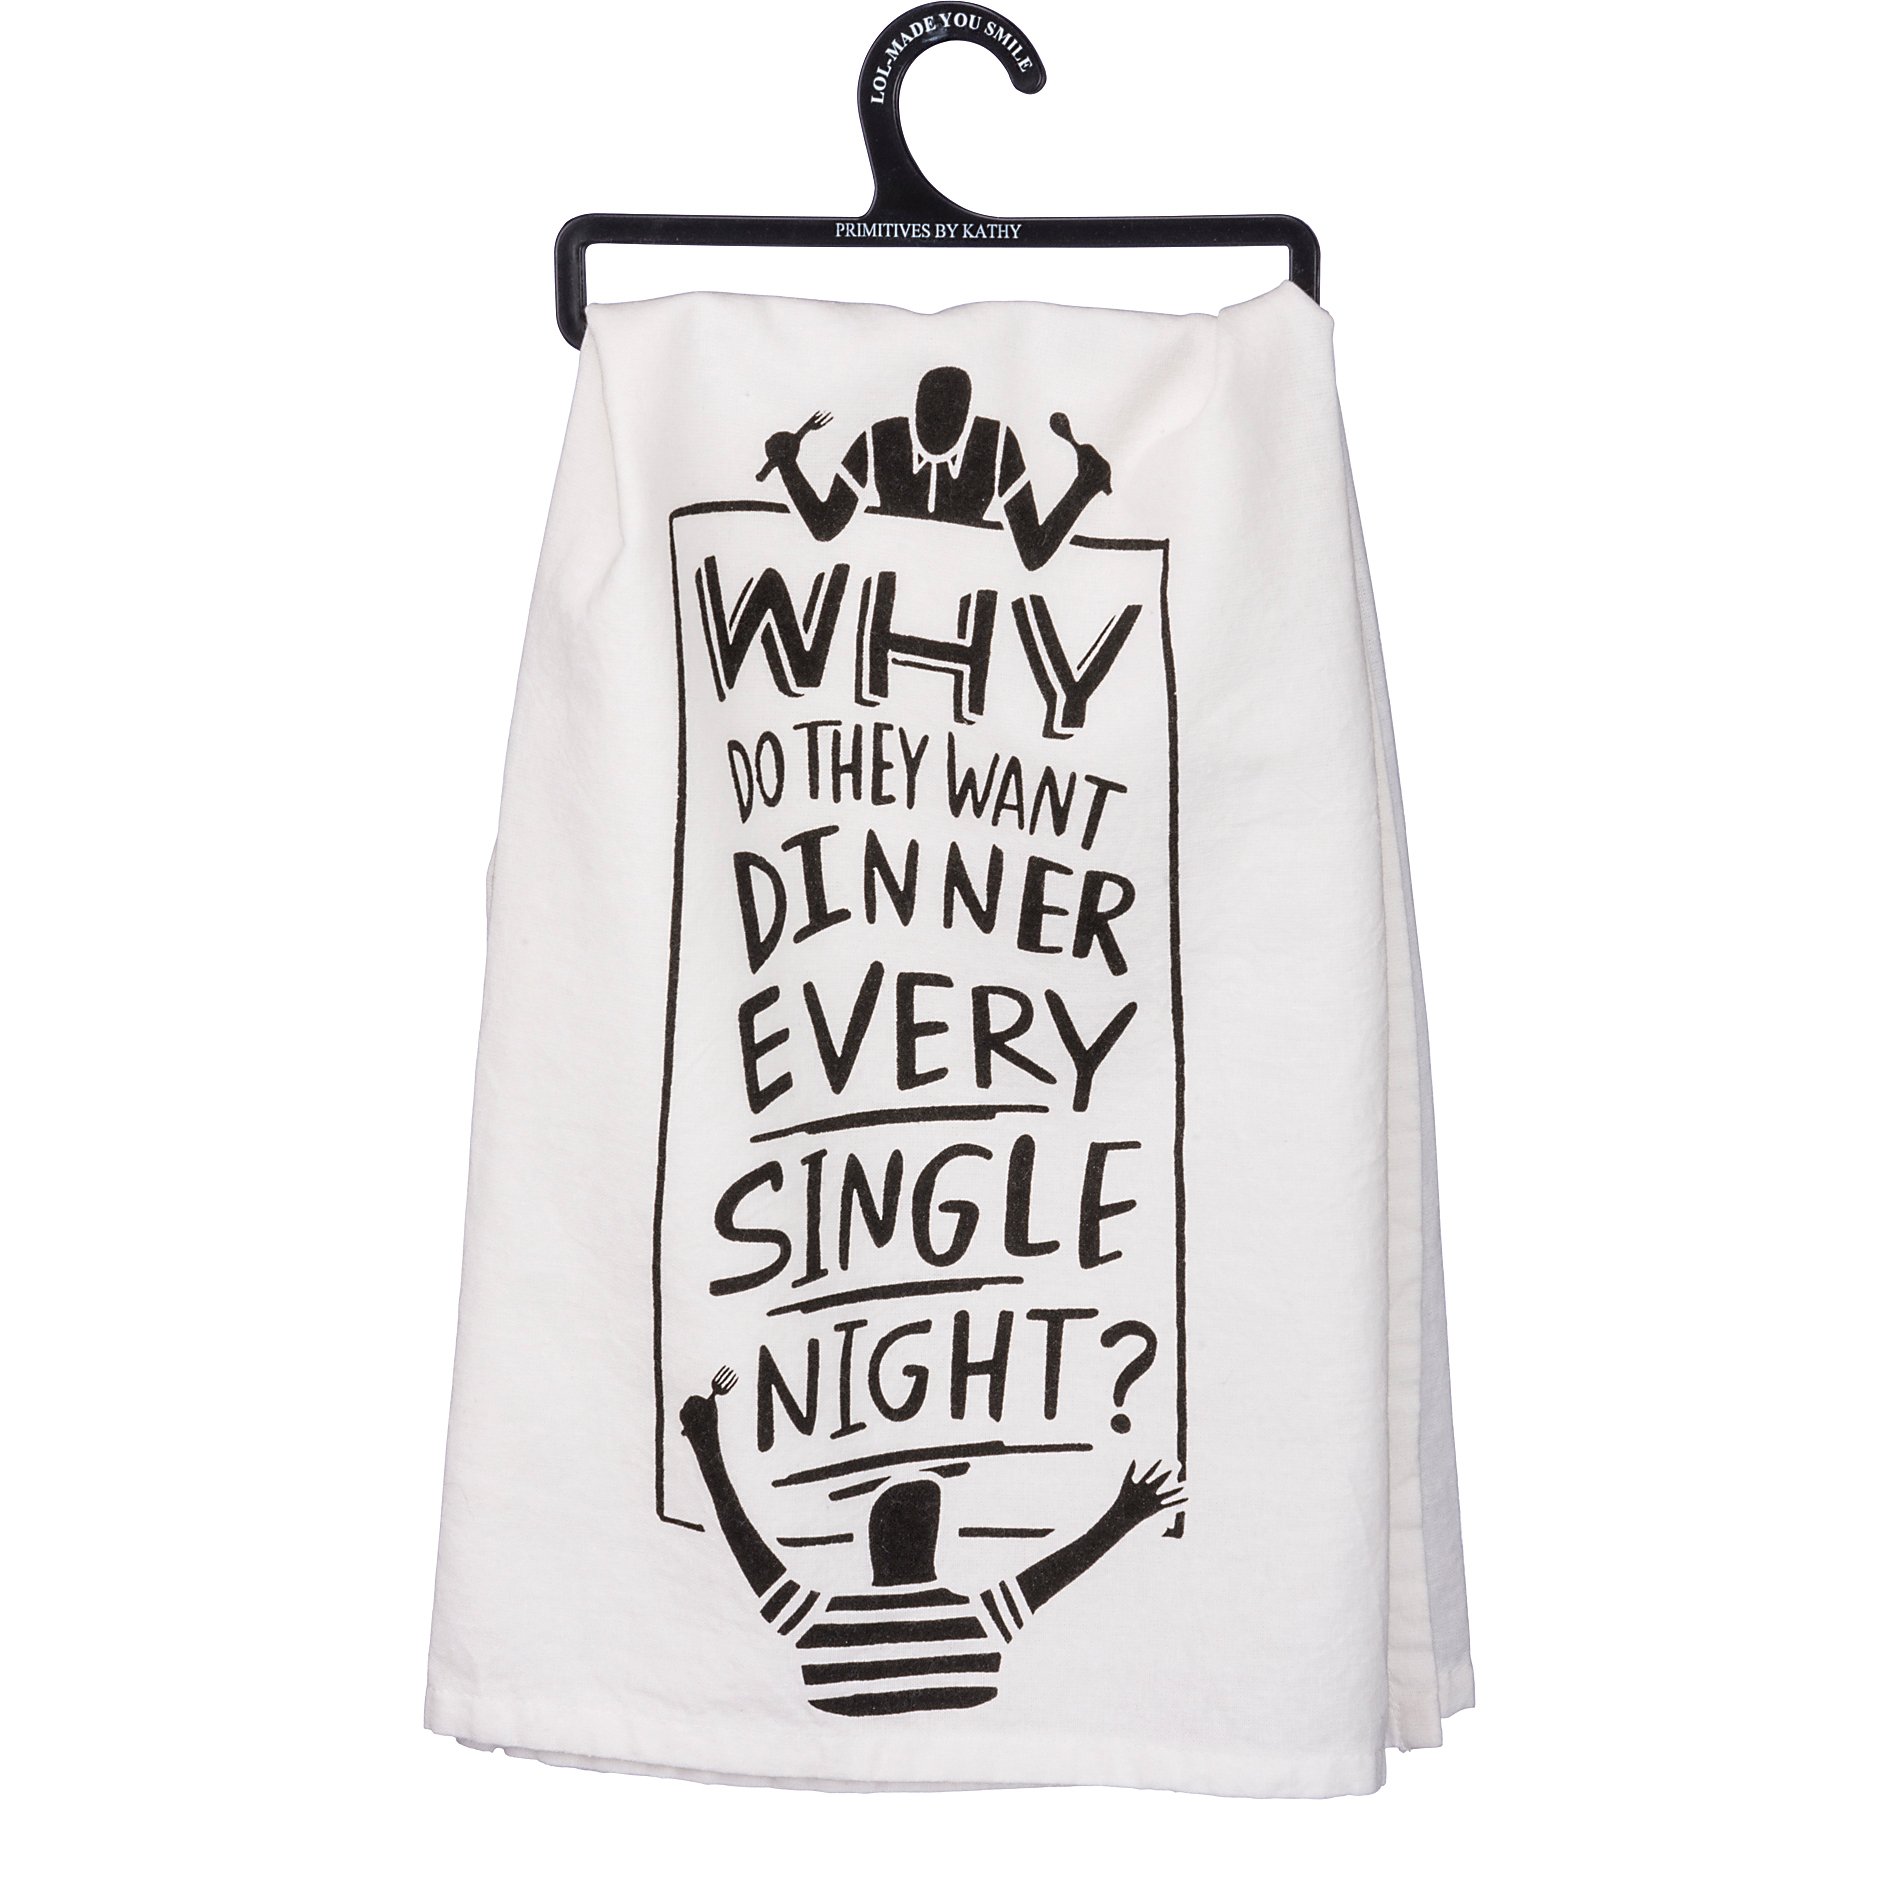 Primitives by Kathy Every Night Dish Towel